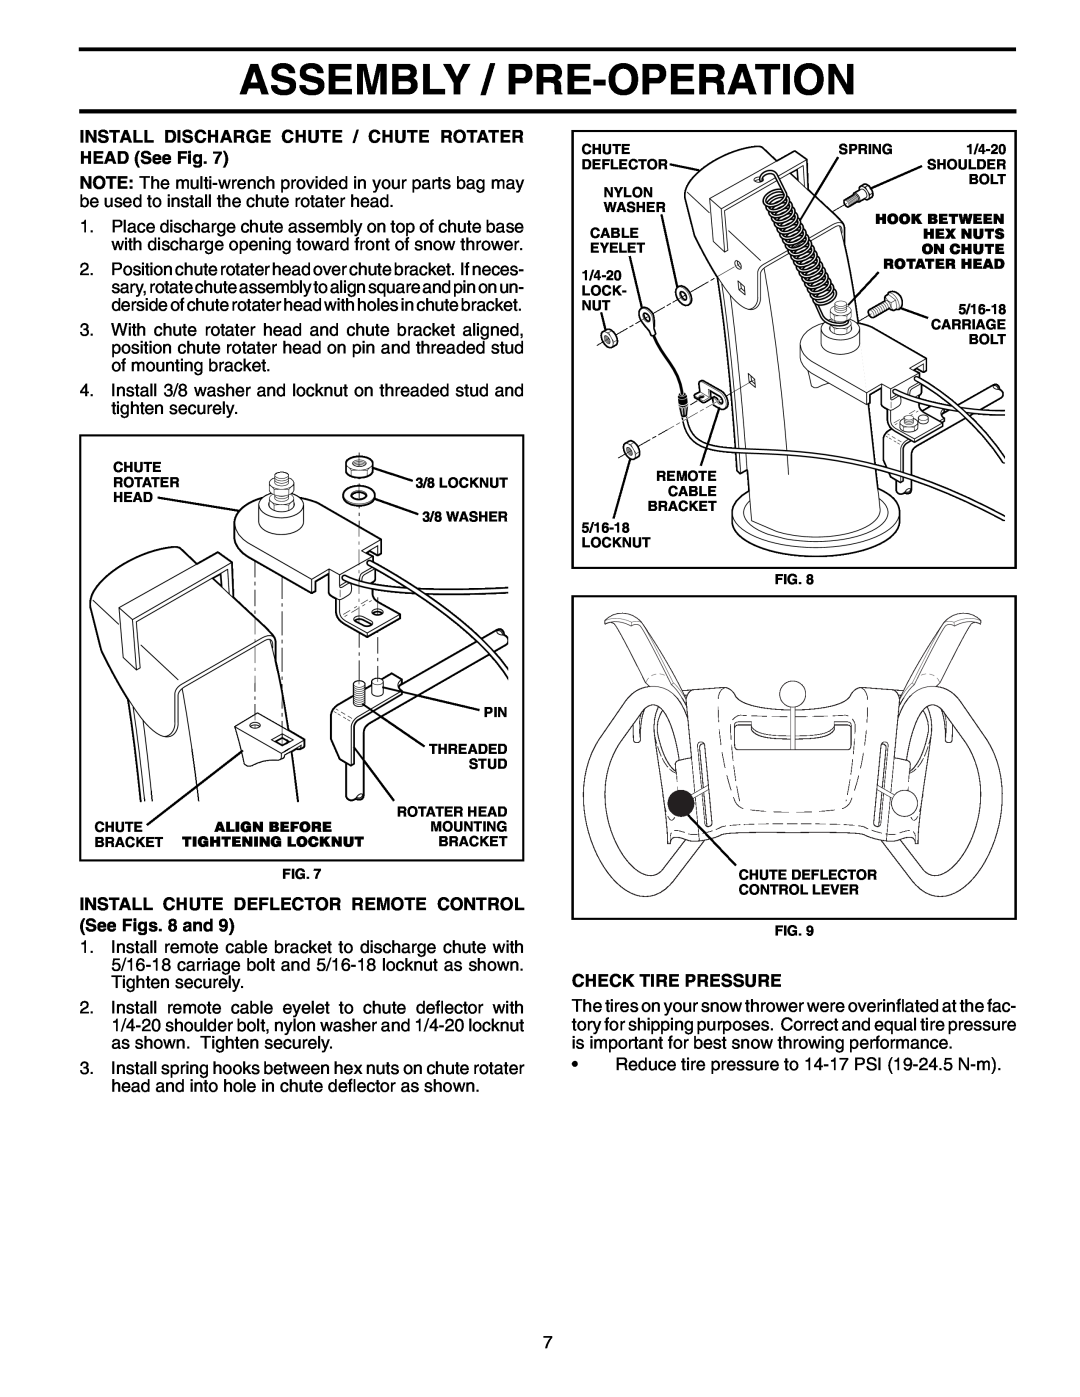 Poulan 406275 Assembly / Pre-Operation, INSTALL DISCHARGE CHUTE / CHUTE ROTATER HEAD See Fig, Check Tire Pressure 